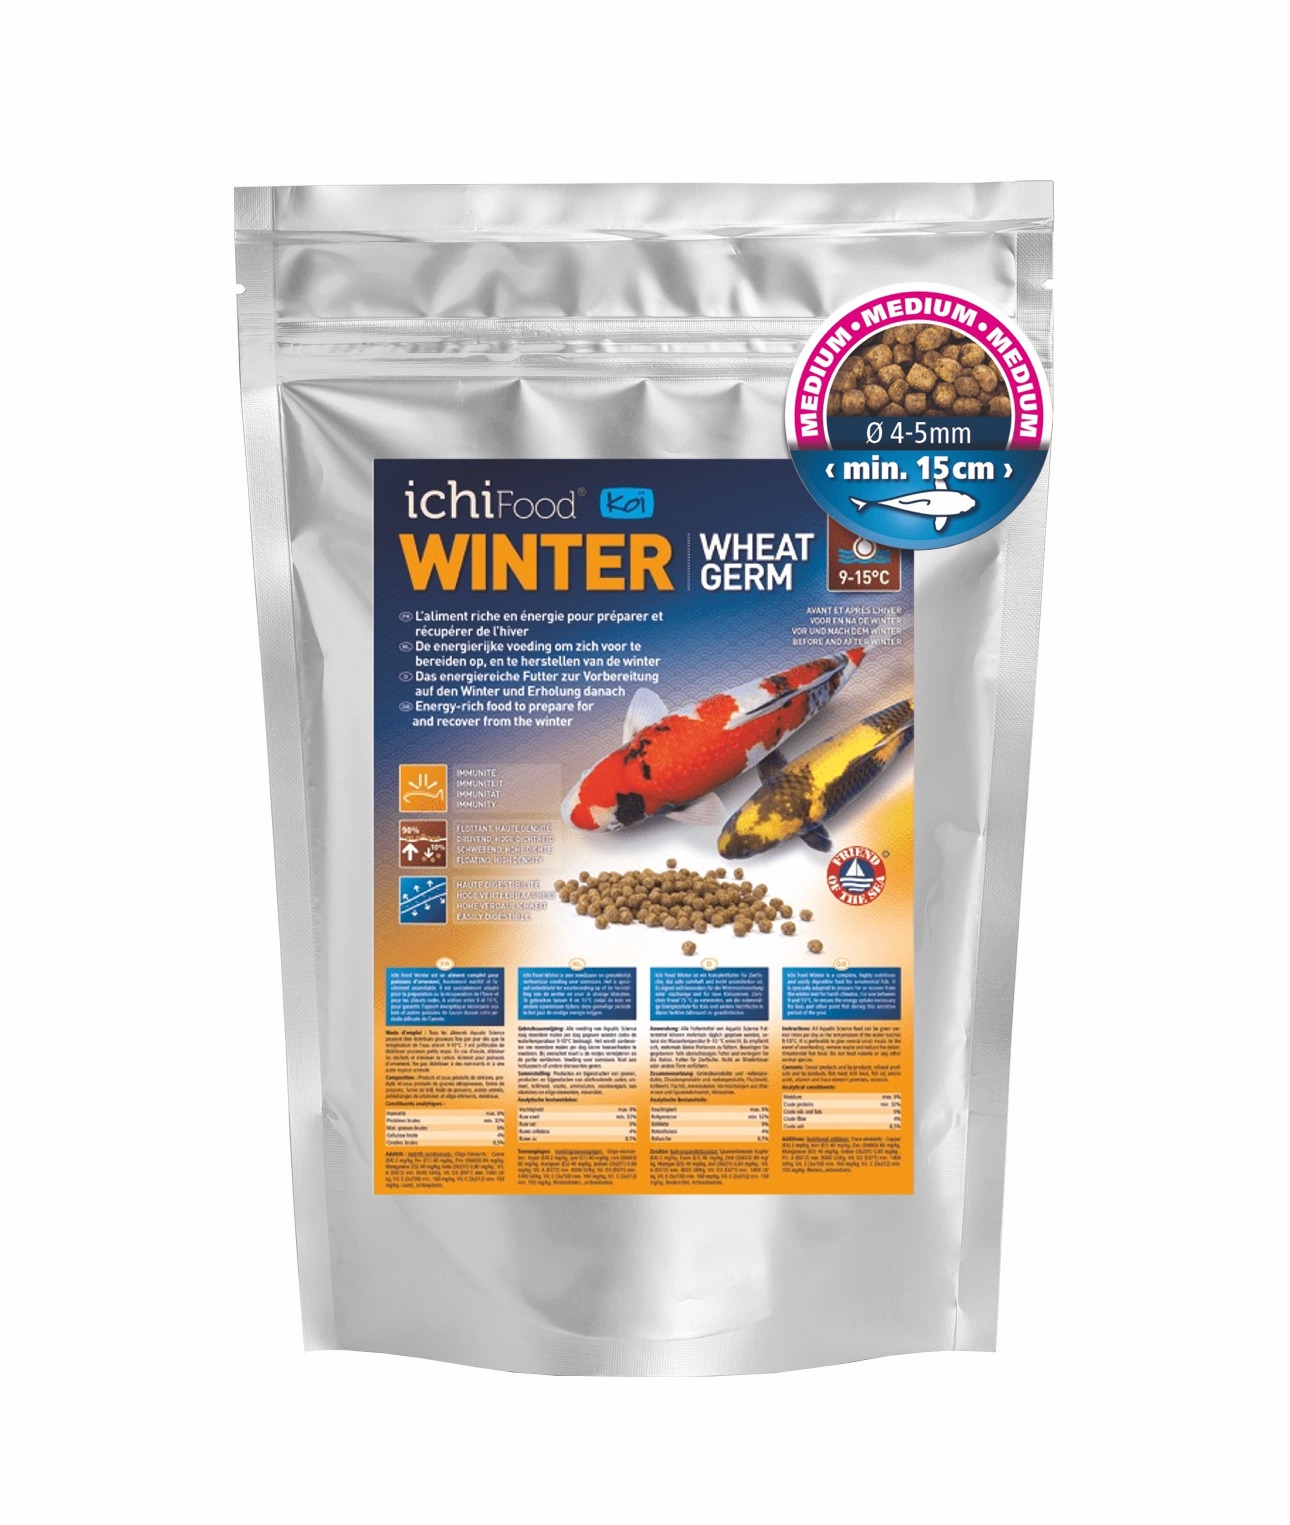 ichi-food-winter-medium-4-a-5-mm-1-kg-aliment-complet-special-hiver-pour-carpes-koi